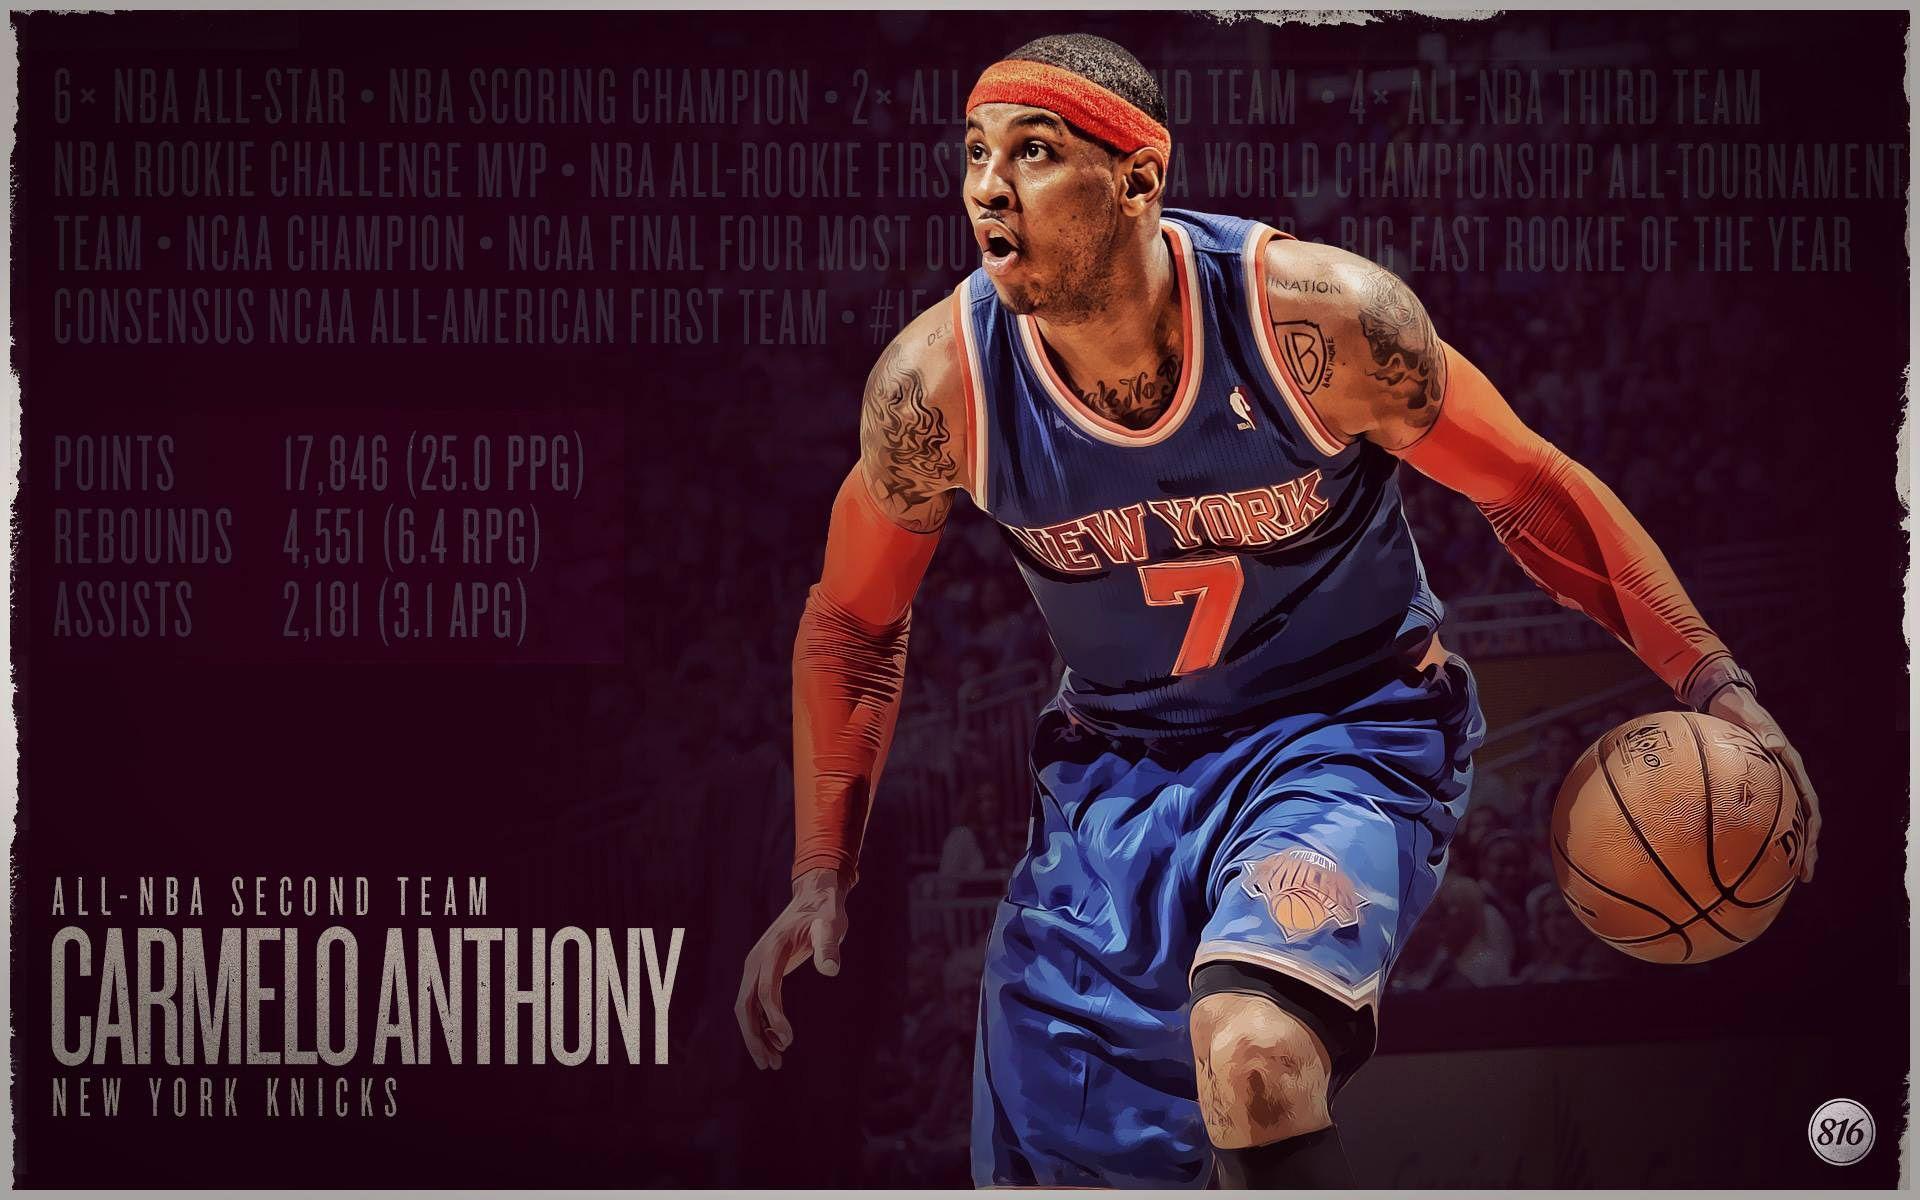 Carmelo Anthony 2022 Wallpapers